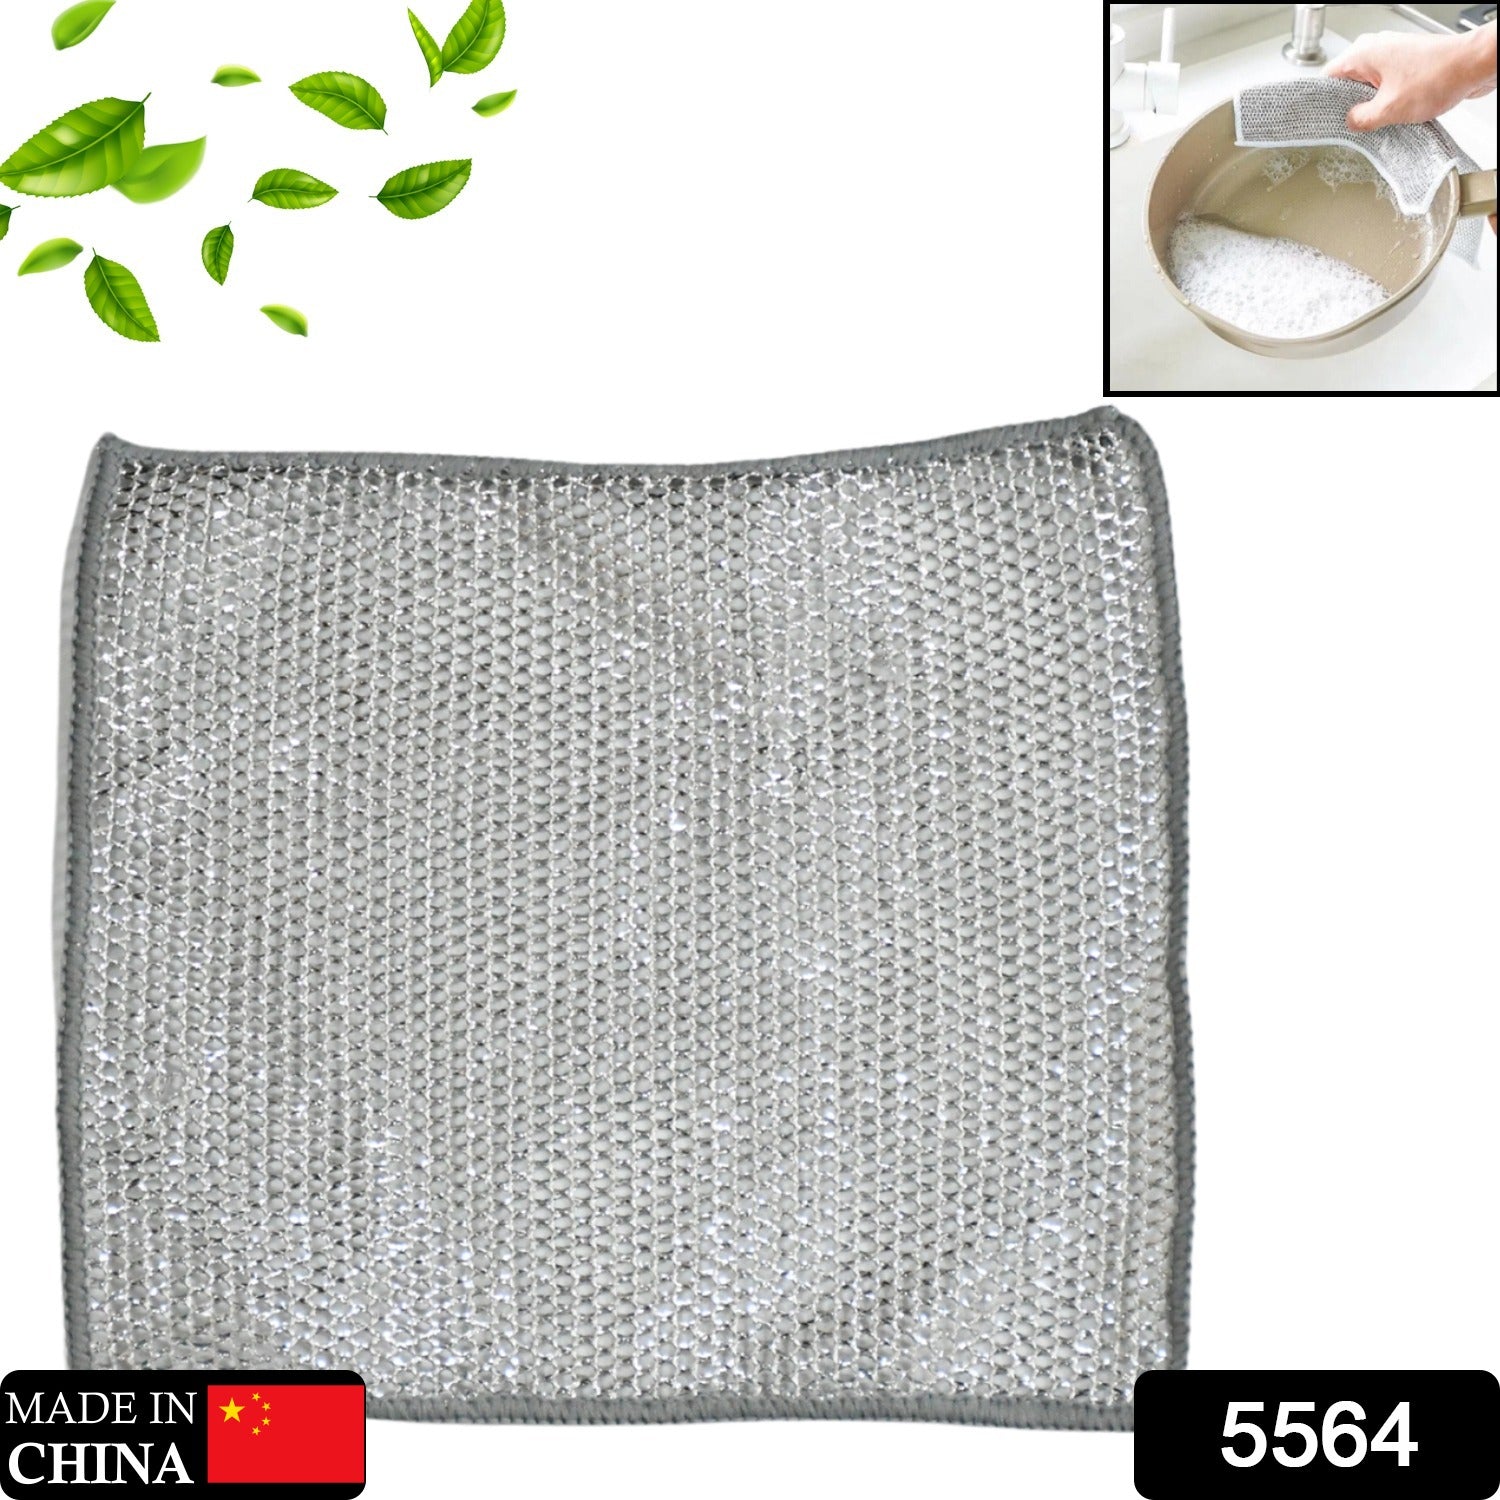 5564 Double-Sided Multipurpose Microfiber Cloths, Stainless Steel Scrubber, Non-Scratch Wire Dishcloth, Durable Kitchen Scrub Cloth (1 Pc / 20x20 Cm)